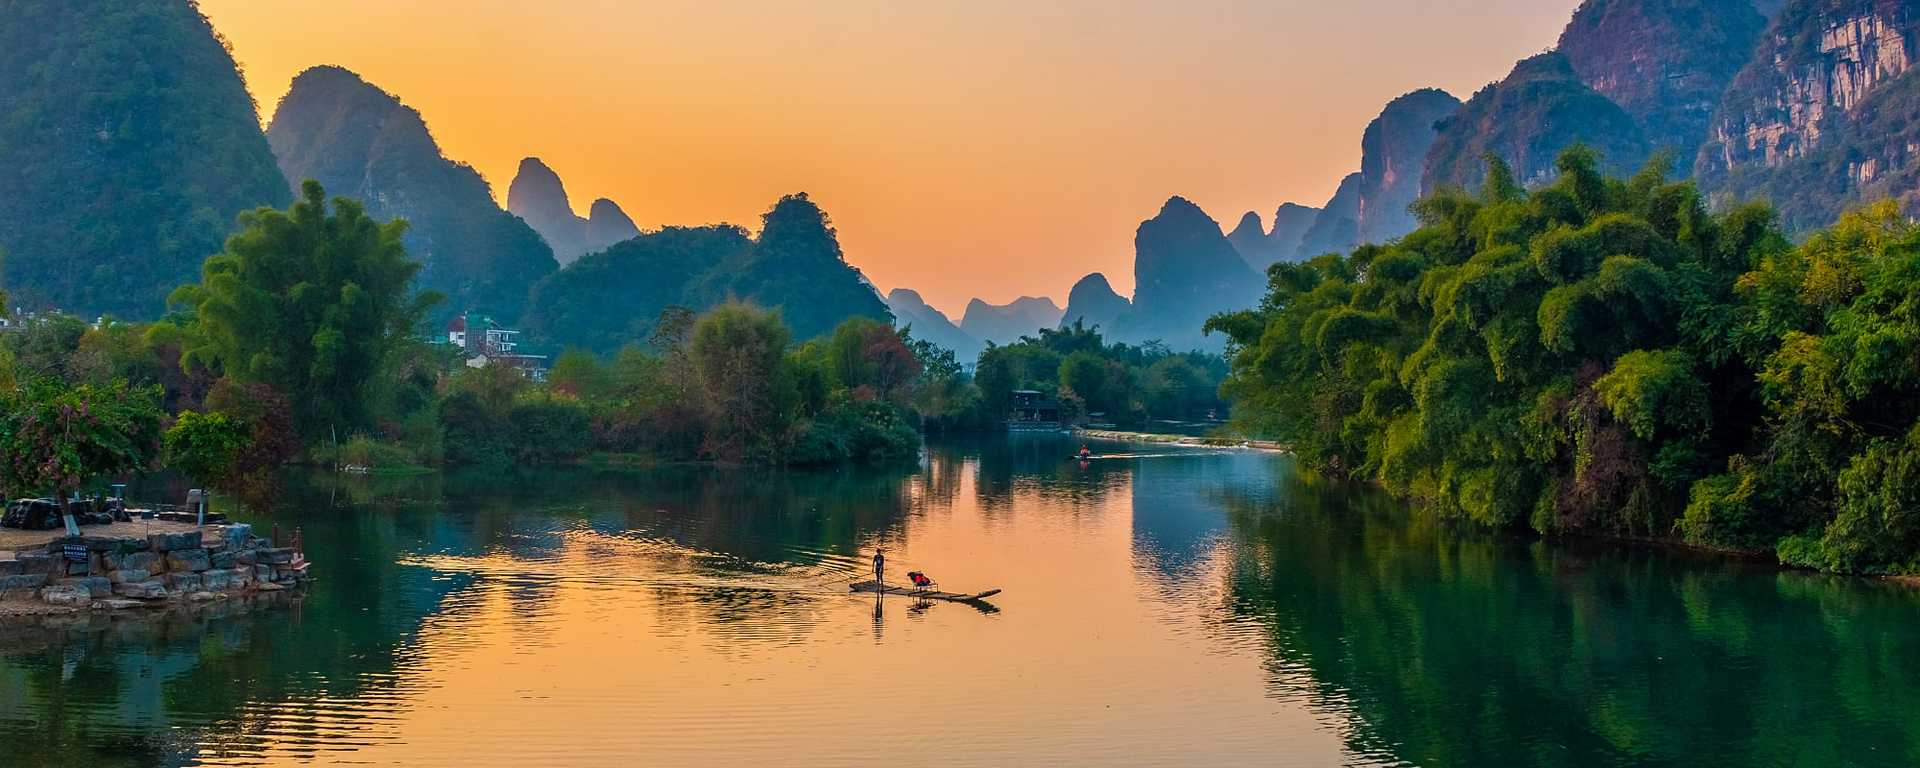 Beautiful sunset on the Yulong River in Guilin, China